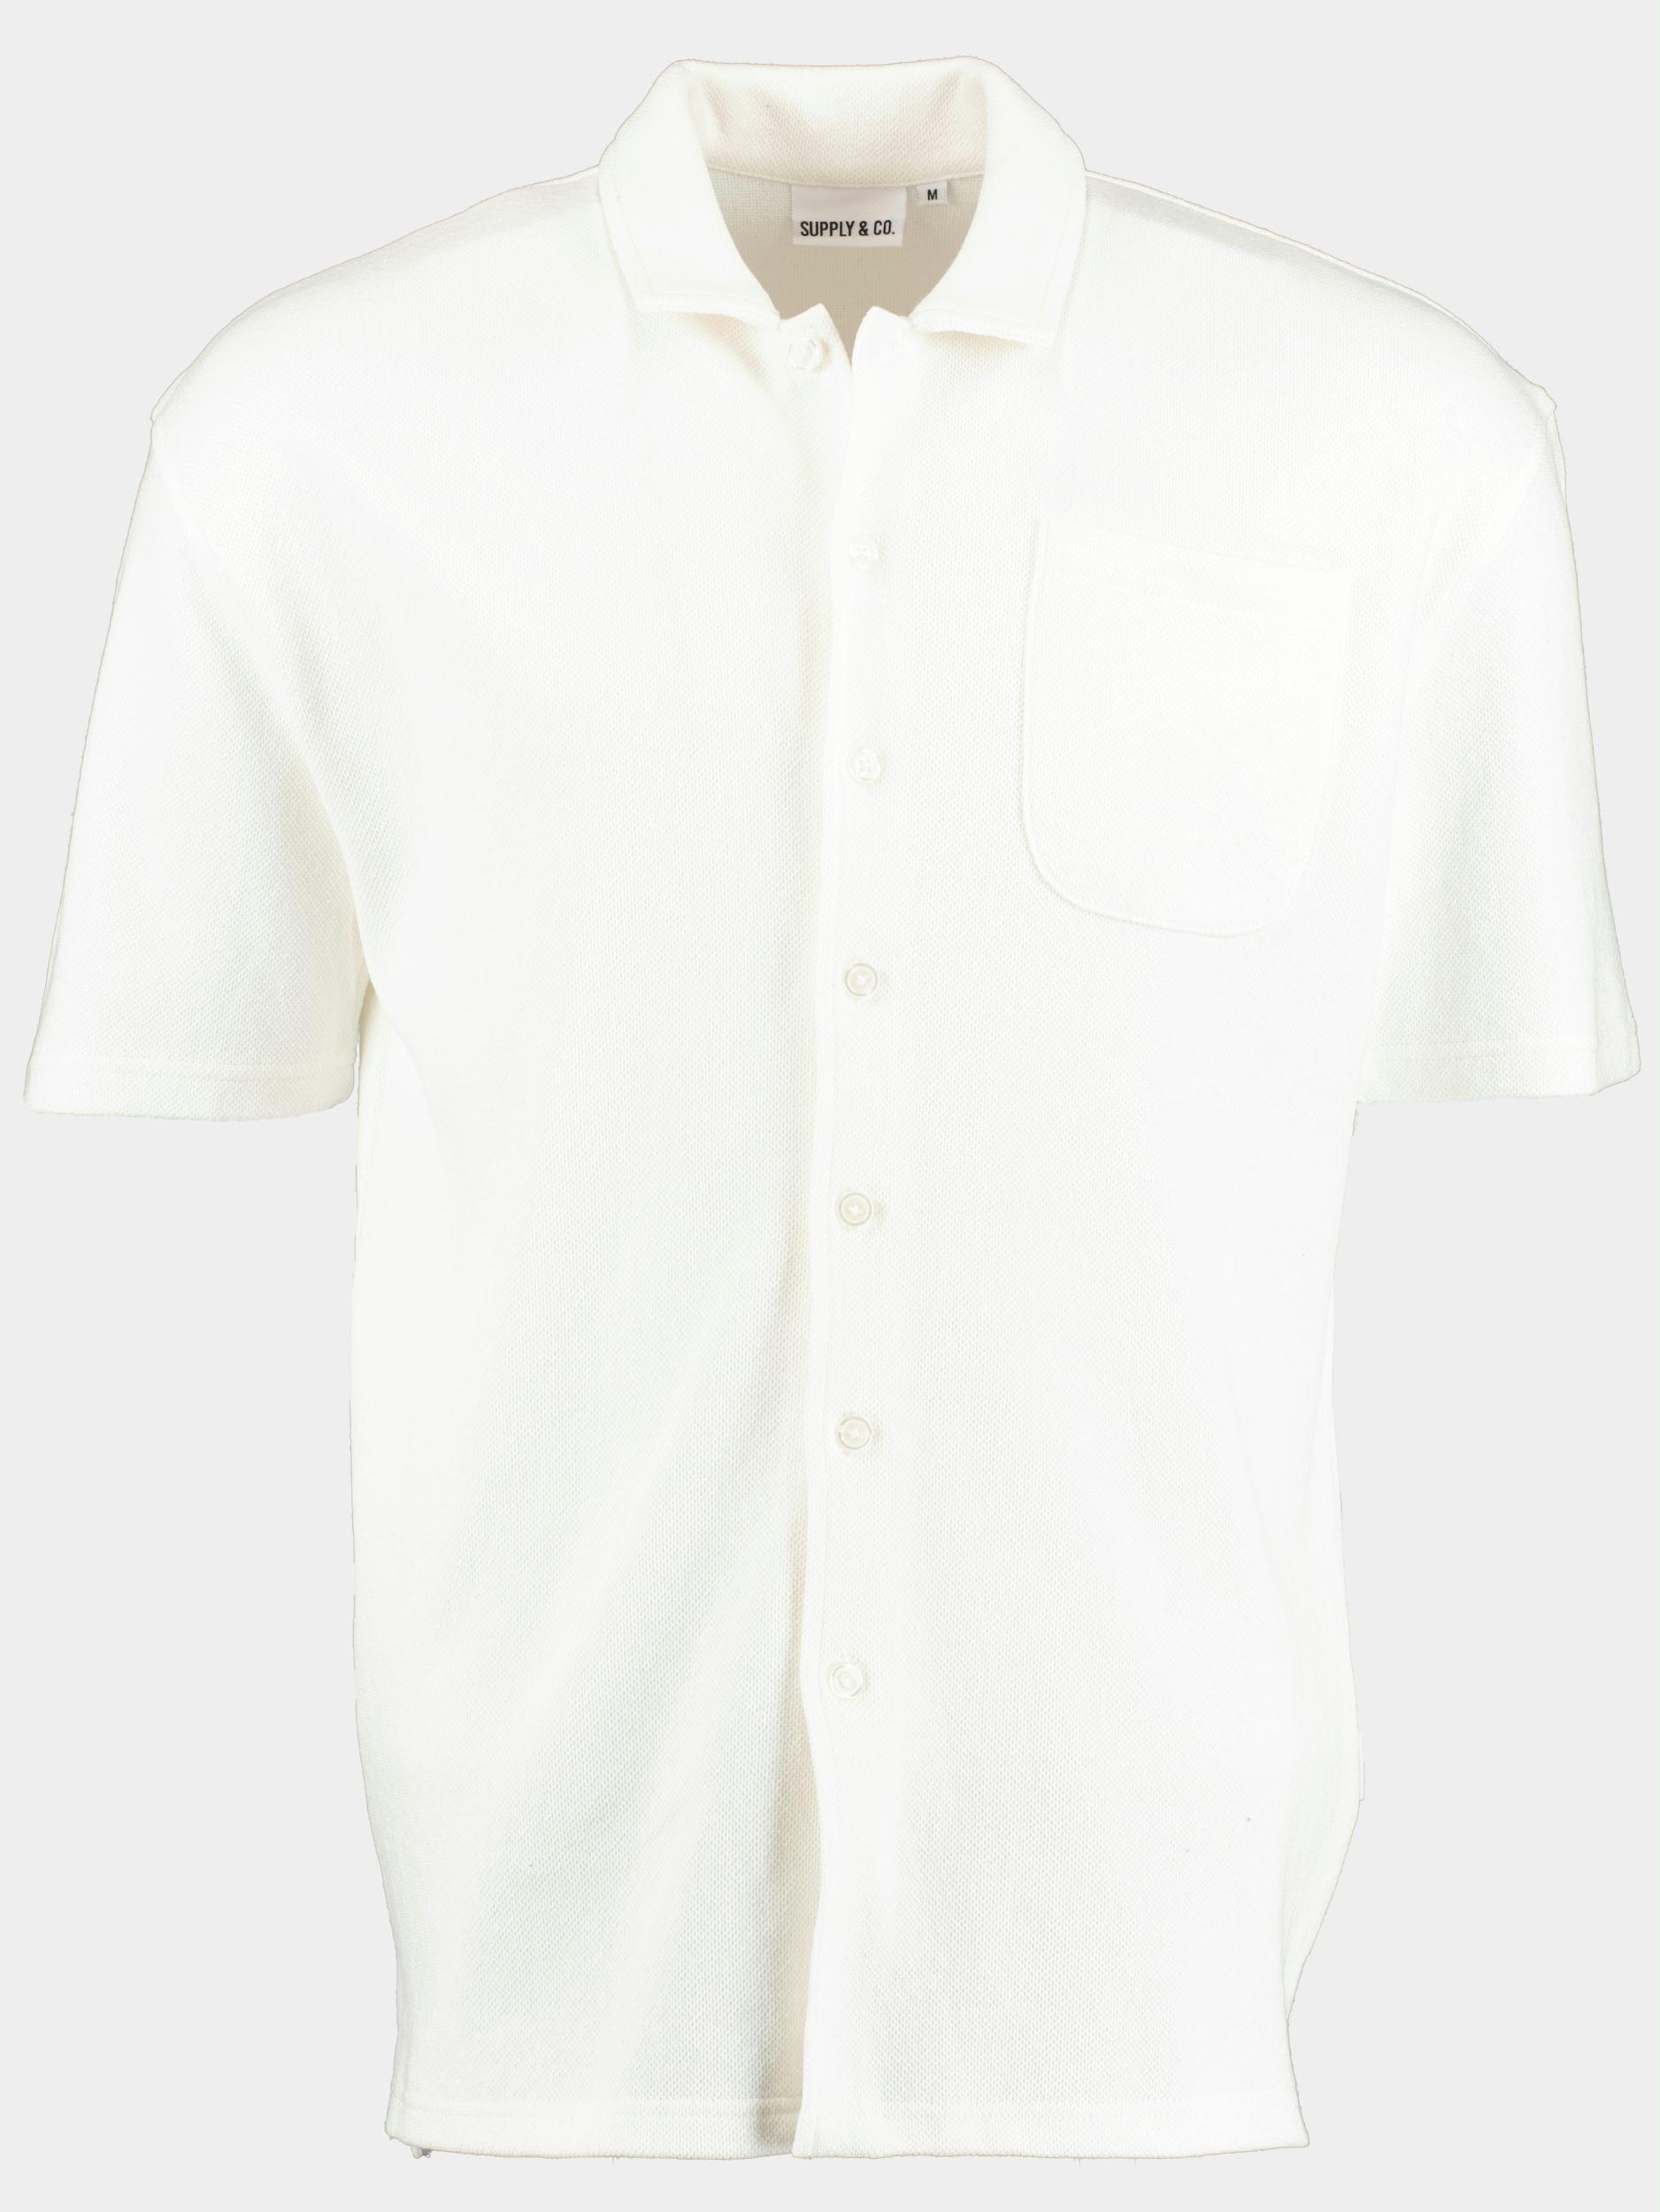 Supply & Co. Casual hemd lange mouw Beige Ame Full Buttoned Polo Shirt 23108AM01/150 off-white